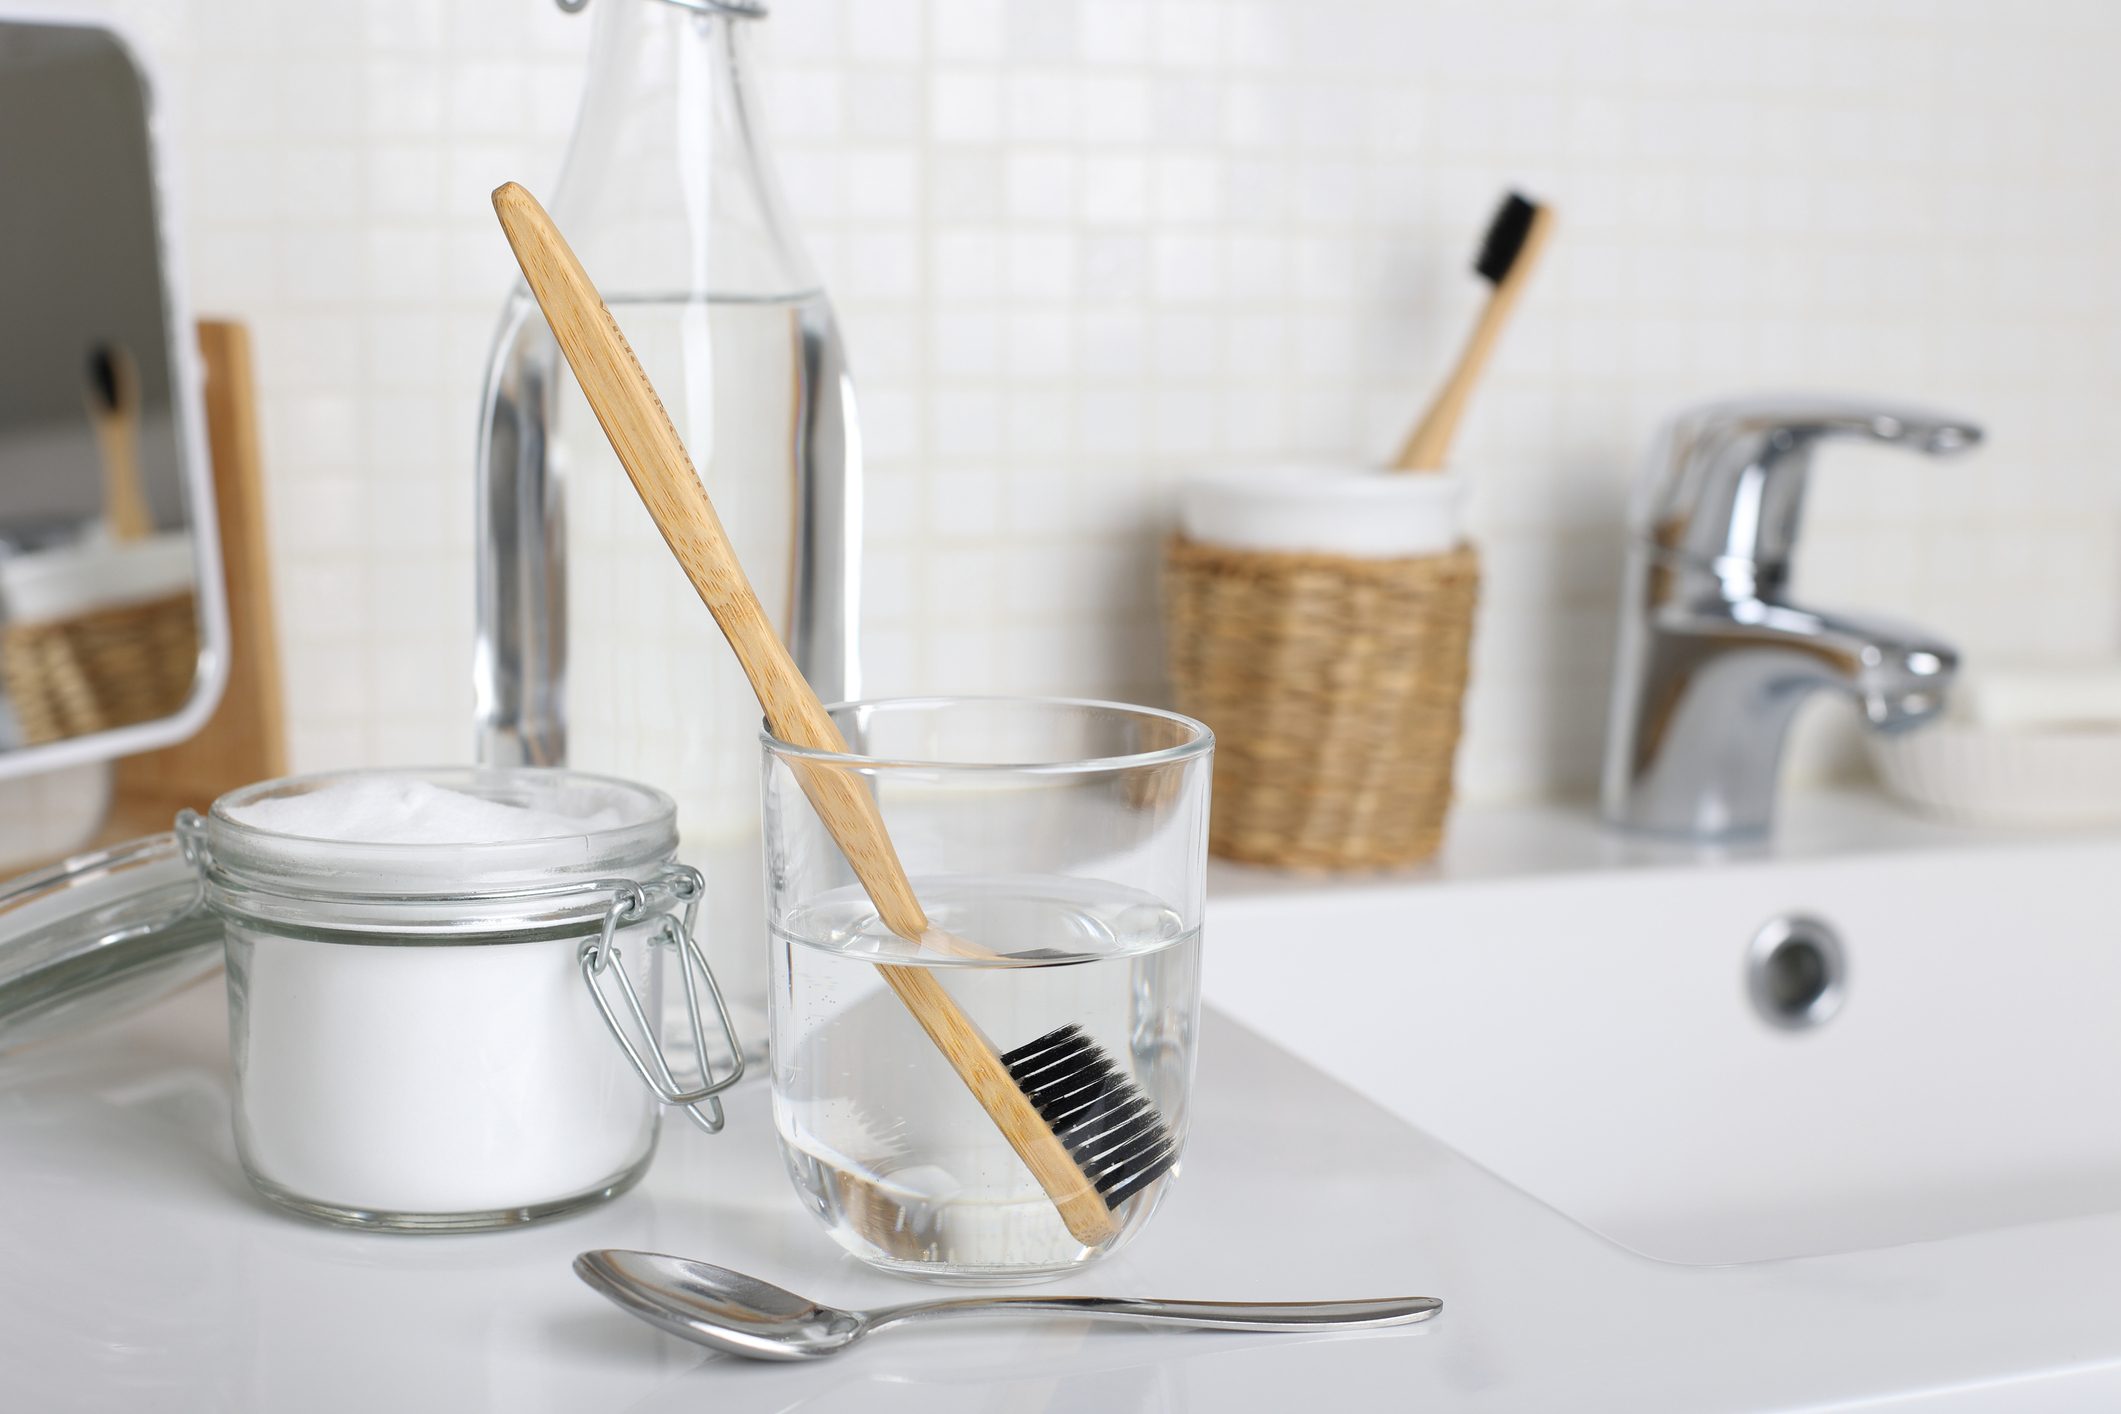 Cleaning a toothbrush with white vinegar, water and baking soda solution on the bathroom sink close up.